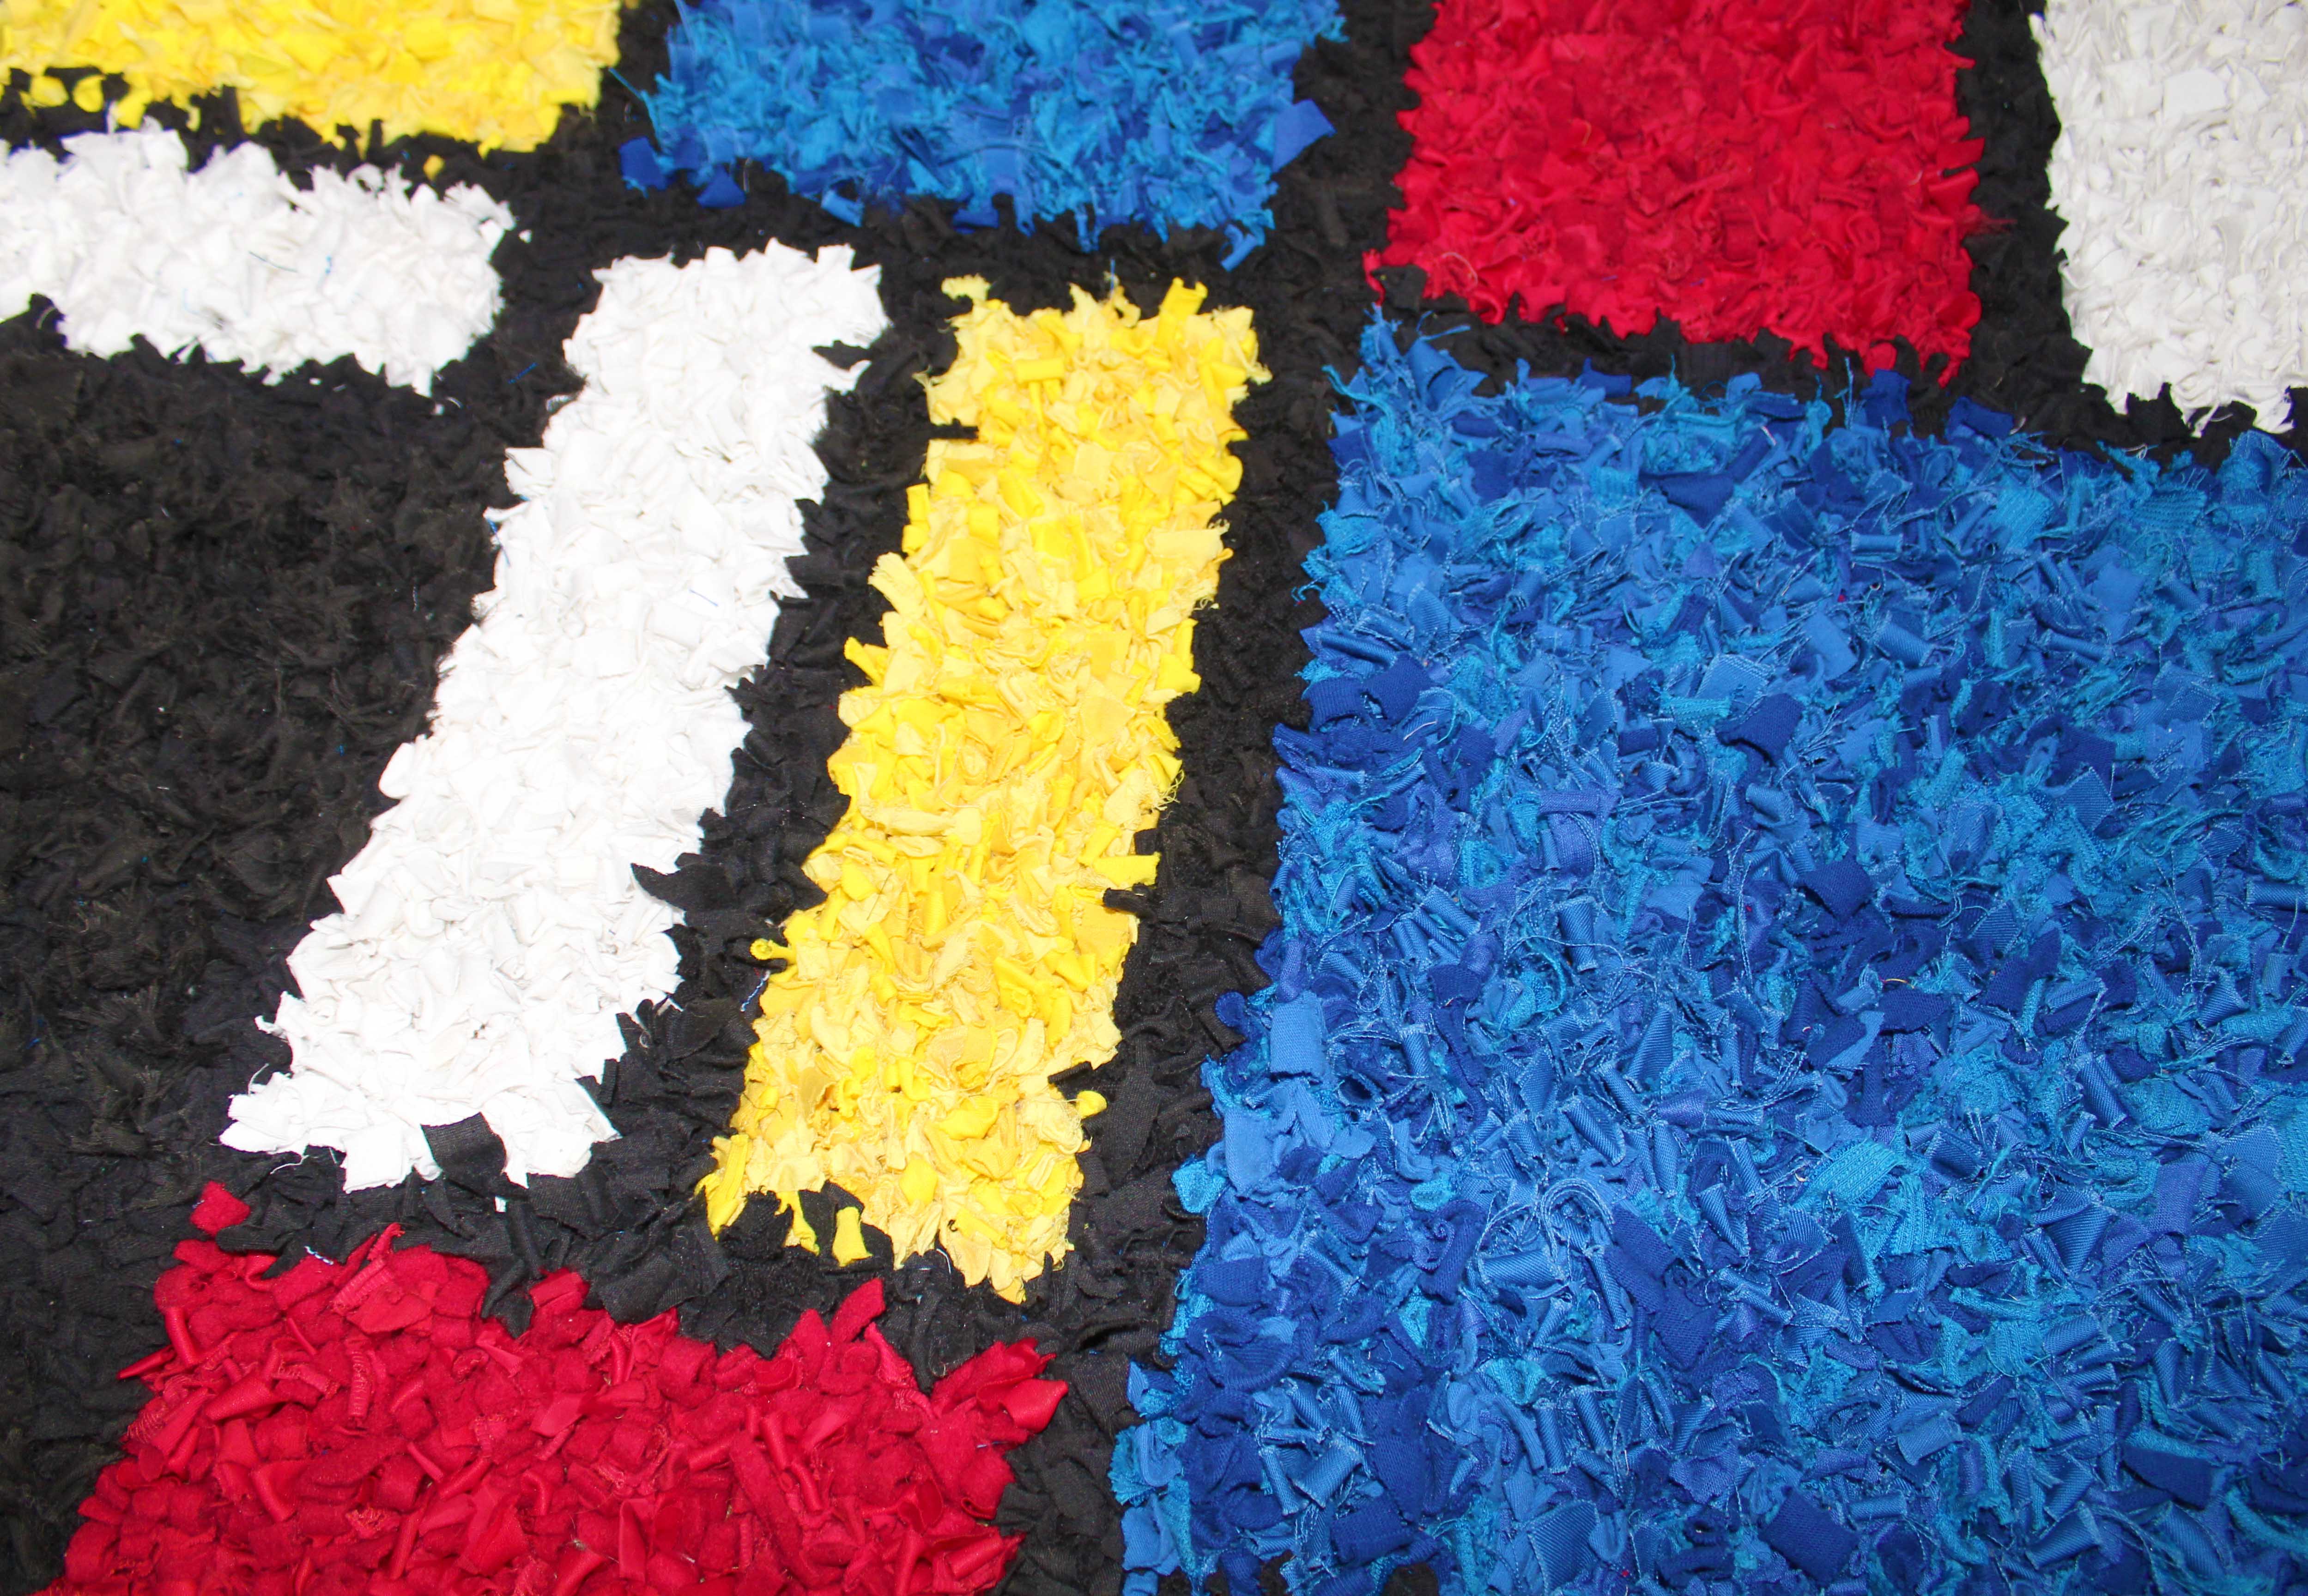 Eco-friendly short shaggy rag rug made using old t-shirts and textile waste